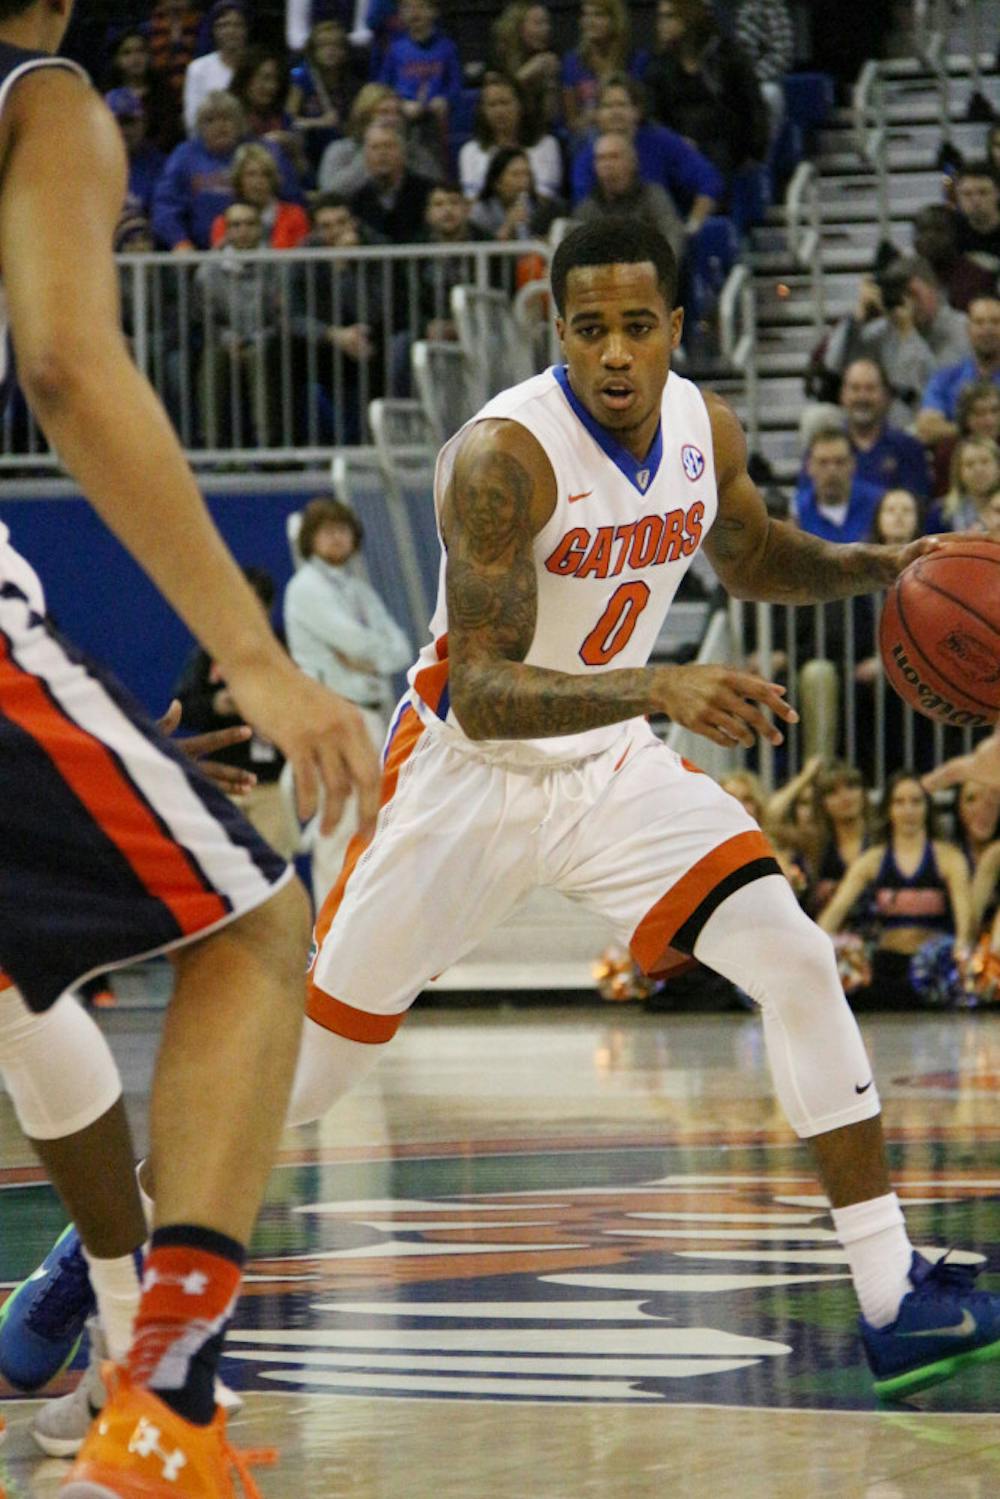 <p>UF’s Kasey Hill prepares to drive during Florida’s 95-63 win against Auburn on Jan. 23, 2016, in the O’Connell Center.</p>